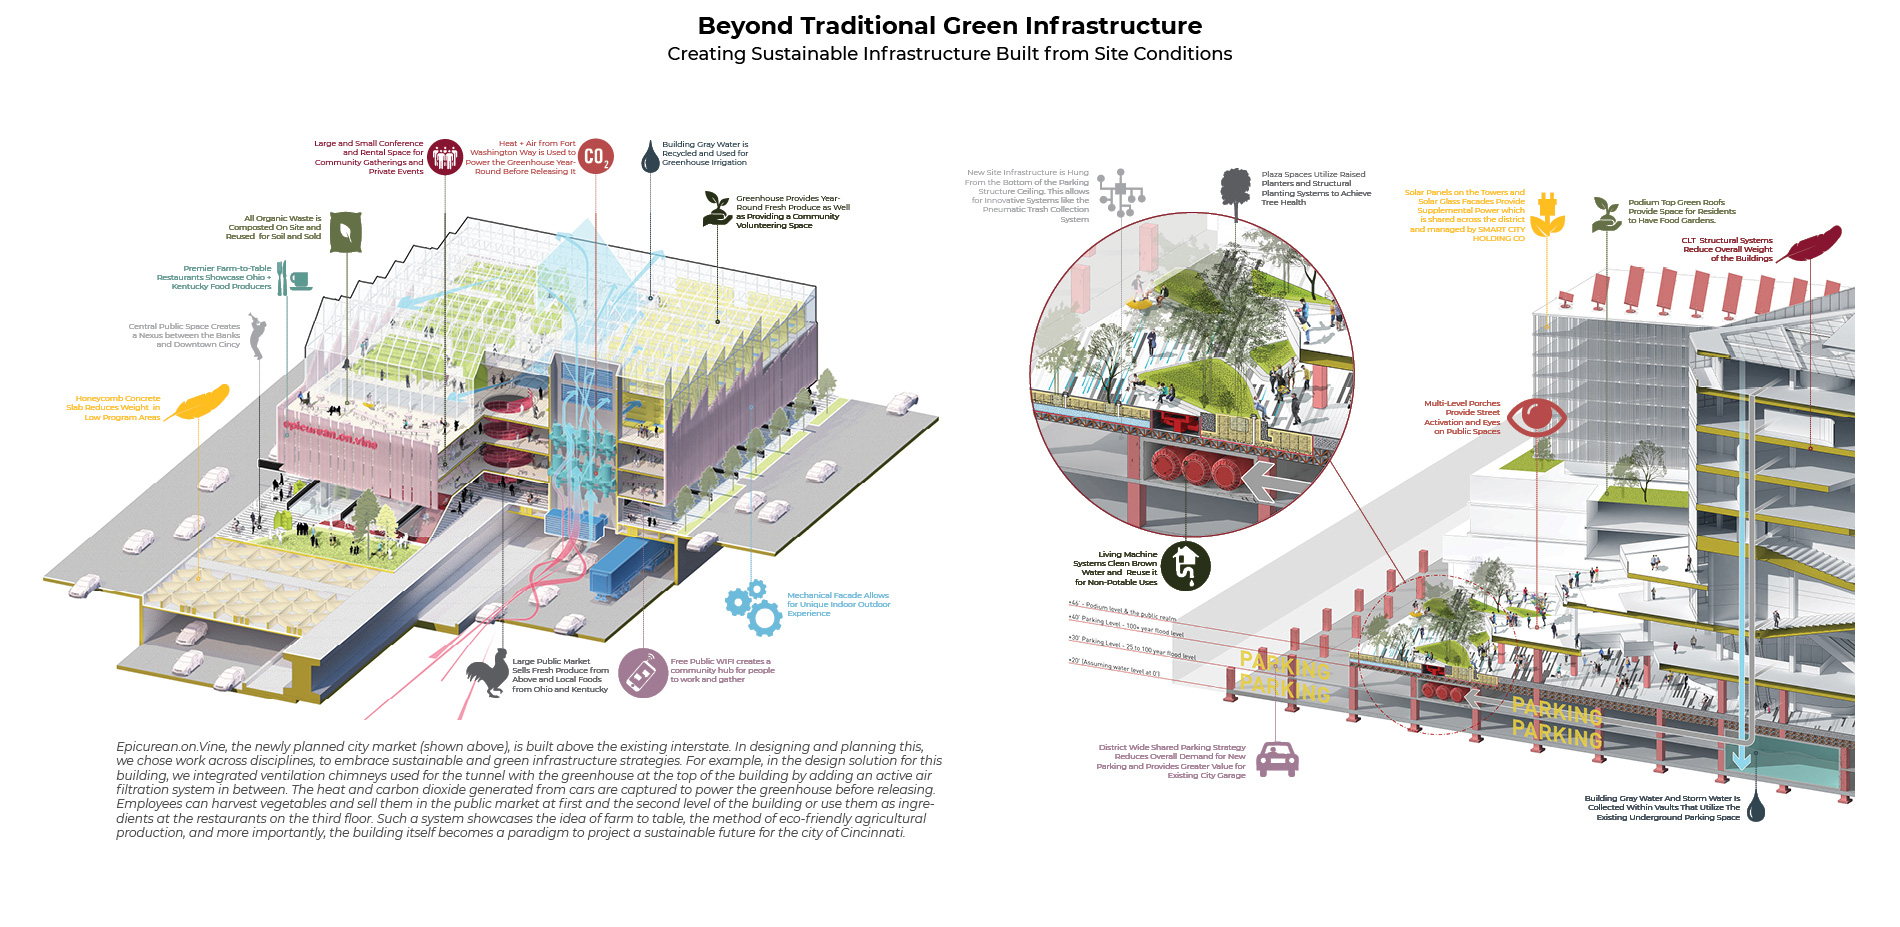 Beyond Traditional Green Infrastructure